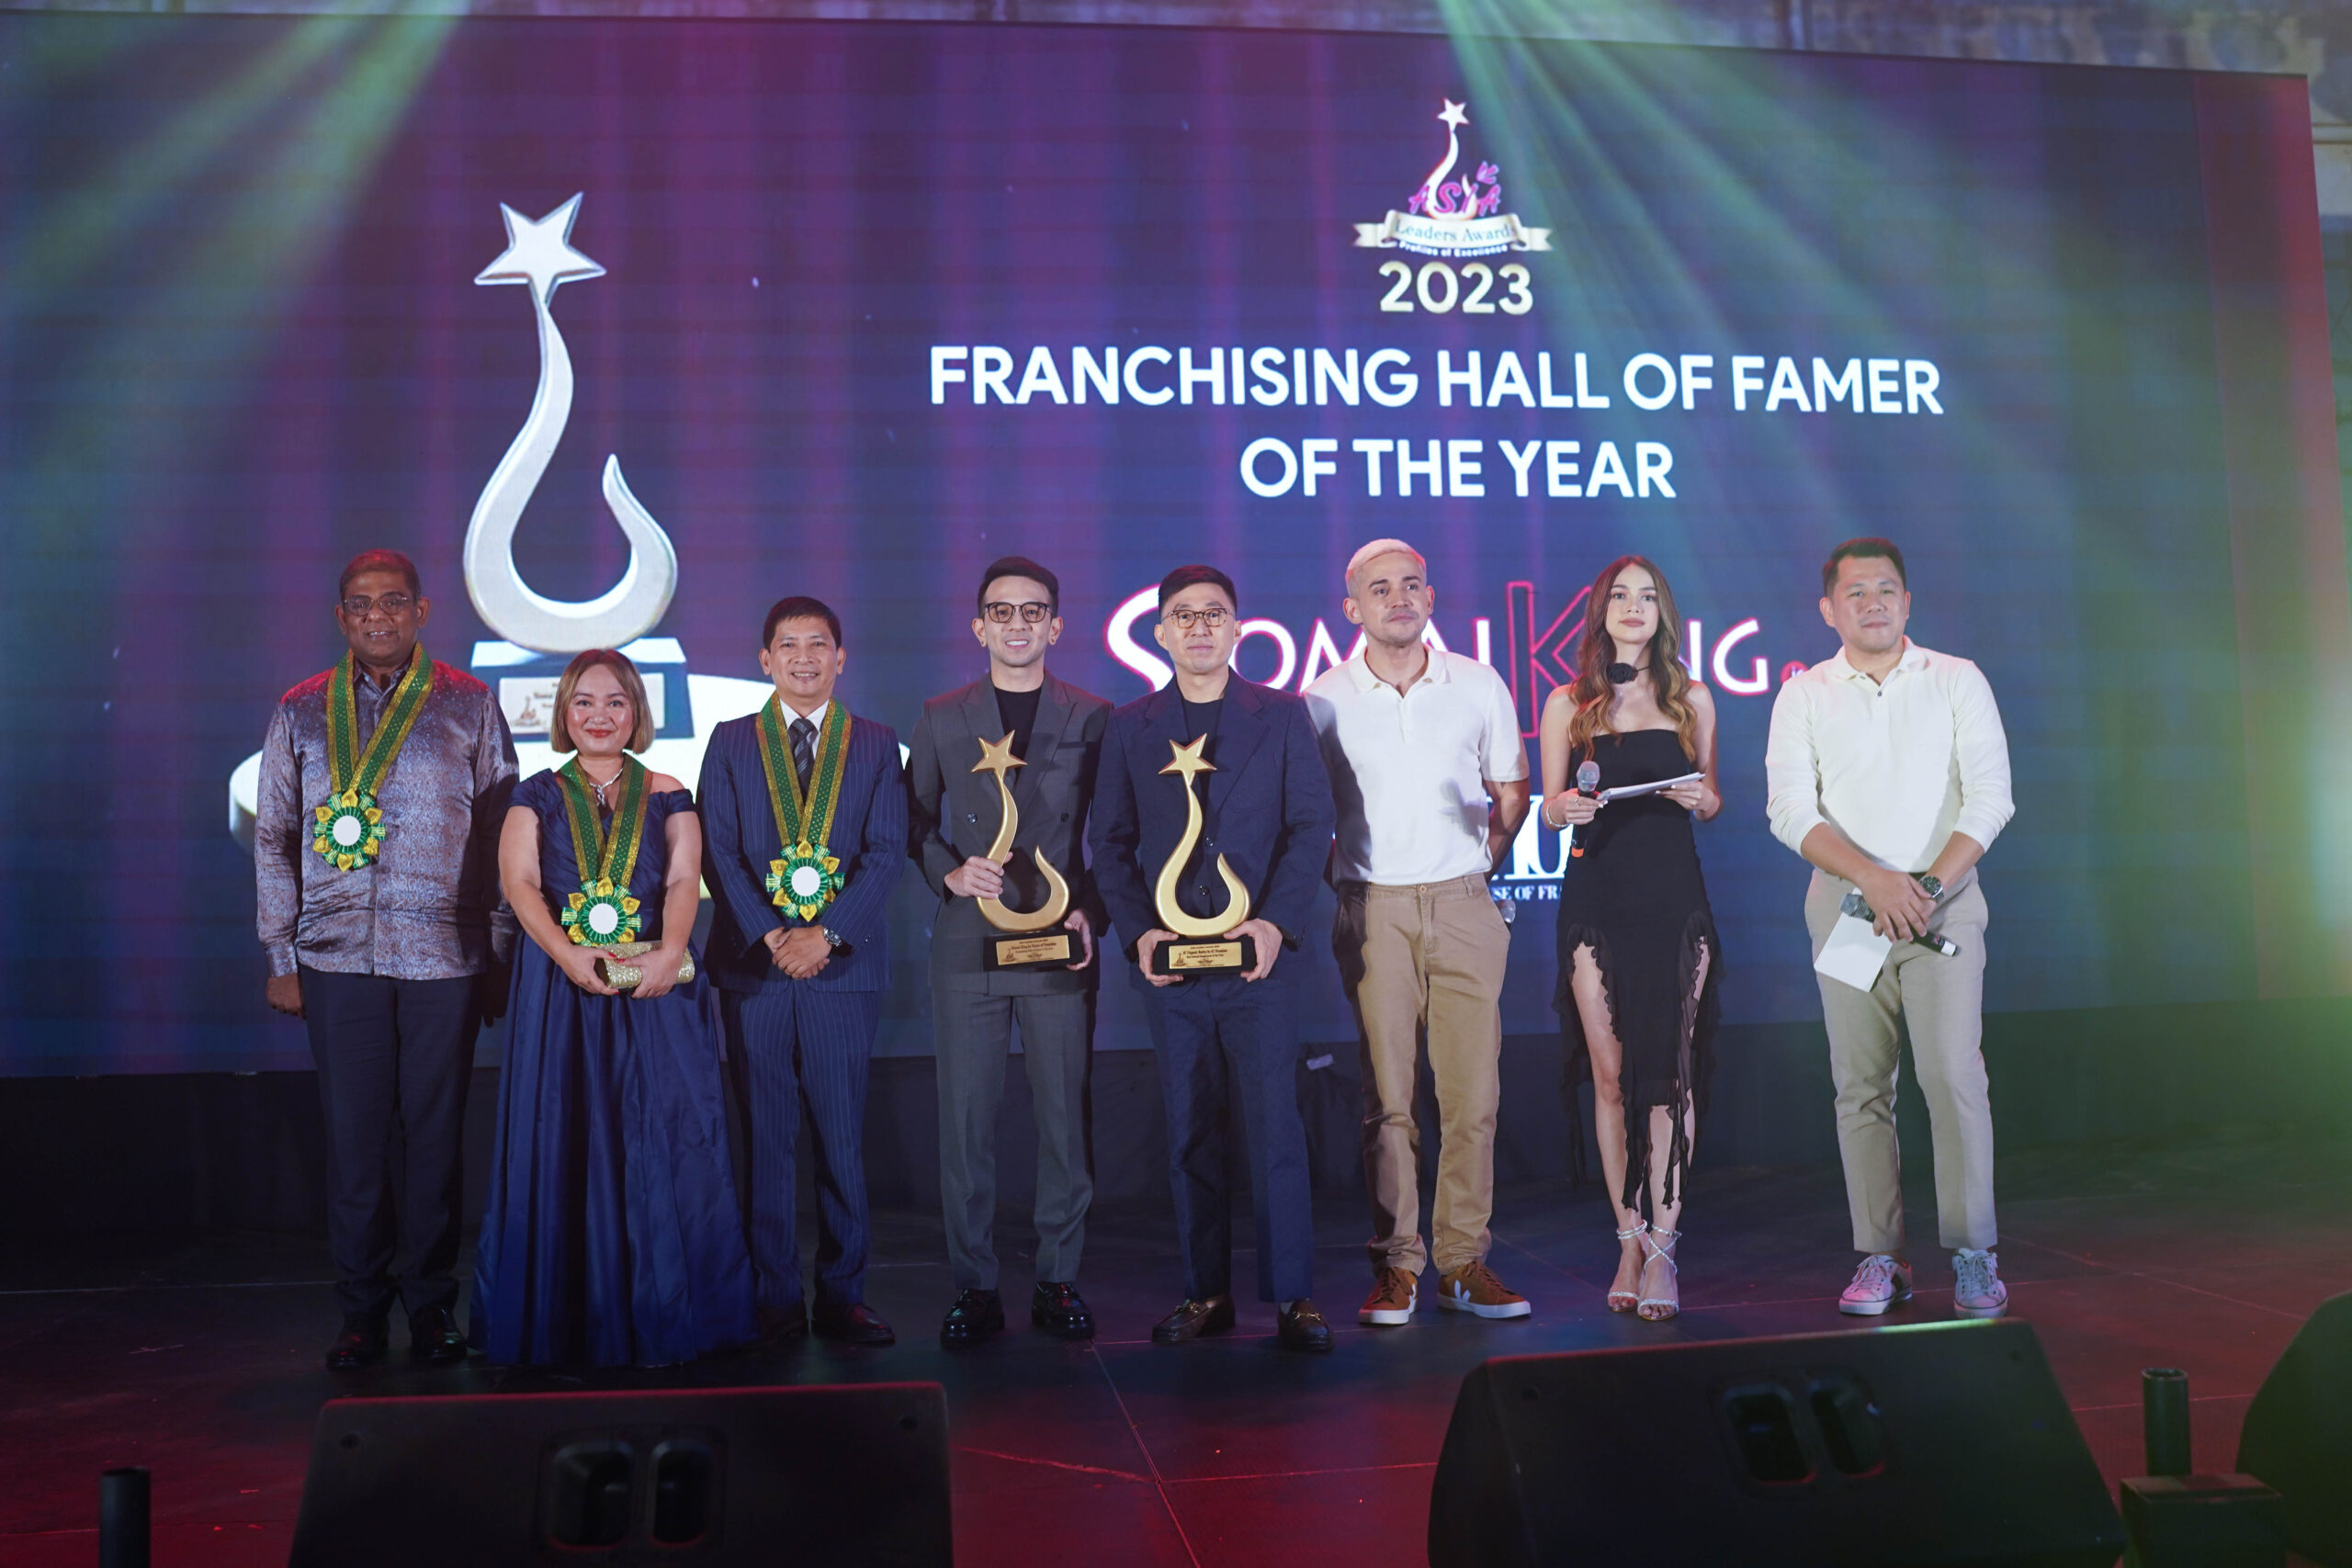 Siomai King, a prominent figure in the franchising business, has been honored as the "Franchising Hall of Famer of the Year" at the Asia Leaders Awards (ALA). This recognition marks a significant milestone for Siomai King, showcasing its remarkable journey. Previously named "Franchising Company of the Year" for three consecutive years in 2020, 2021, and 2022. And in 2023 the company has finally achieved the esteemed Hall of Fame status.